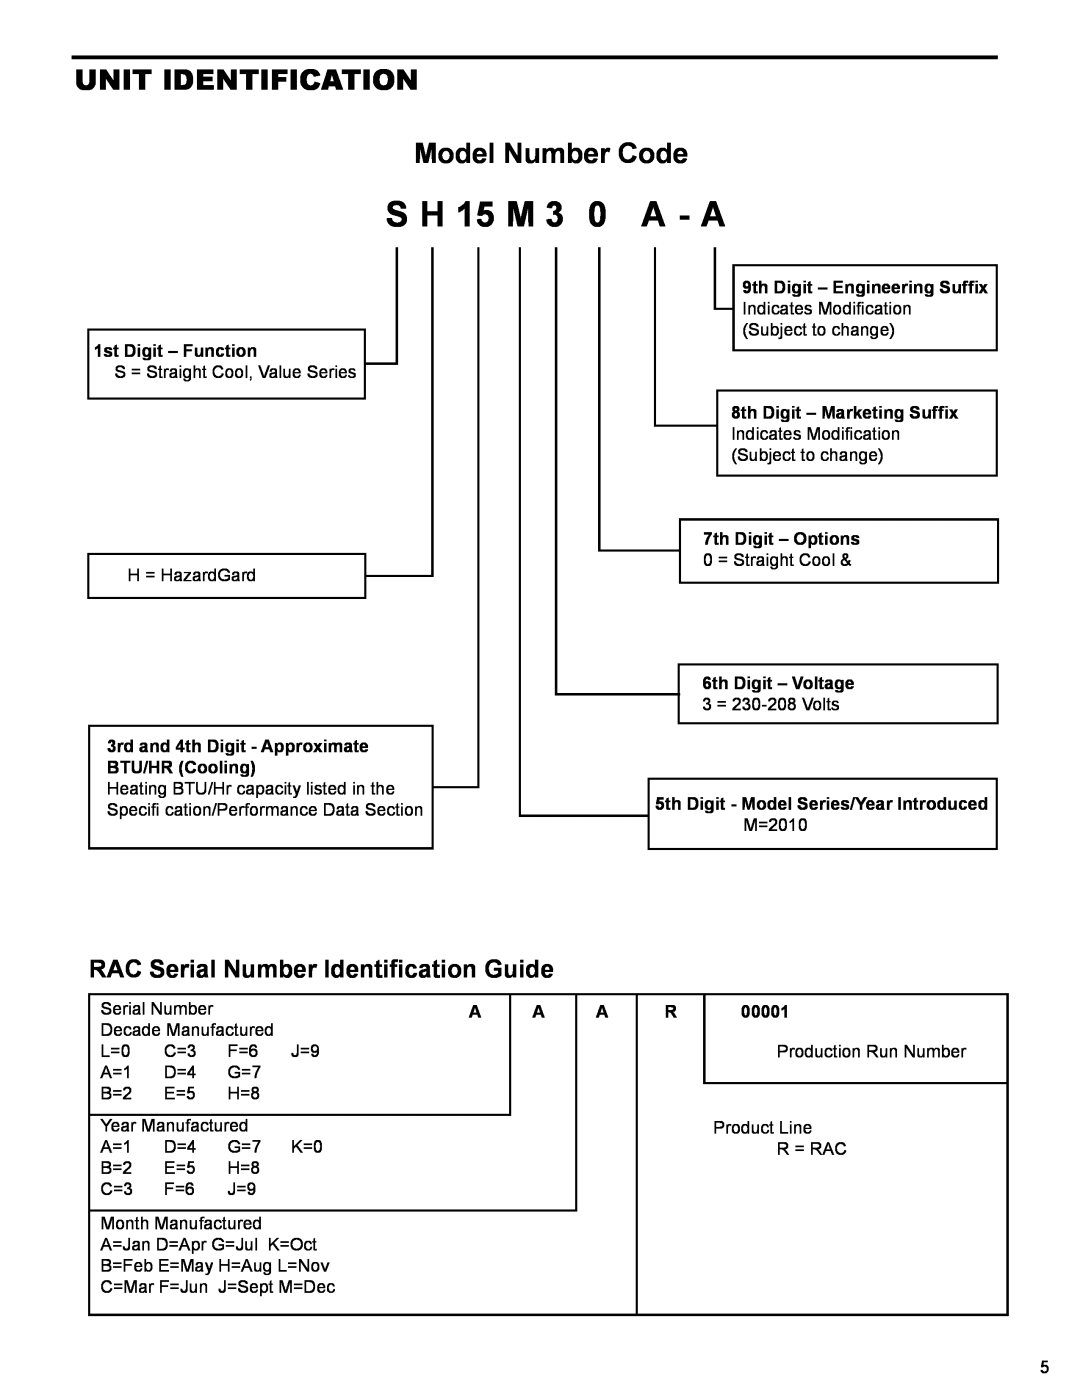 Friedrich R-410A UNIT IDENTIFICATION Model Number Code, RAC Serial Number Identiﬁ cation Guide, S H 15 M 3 0 A - A, 00001 